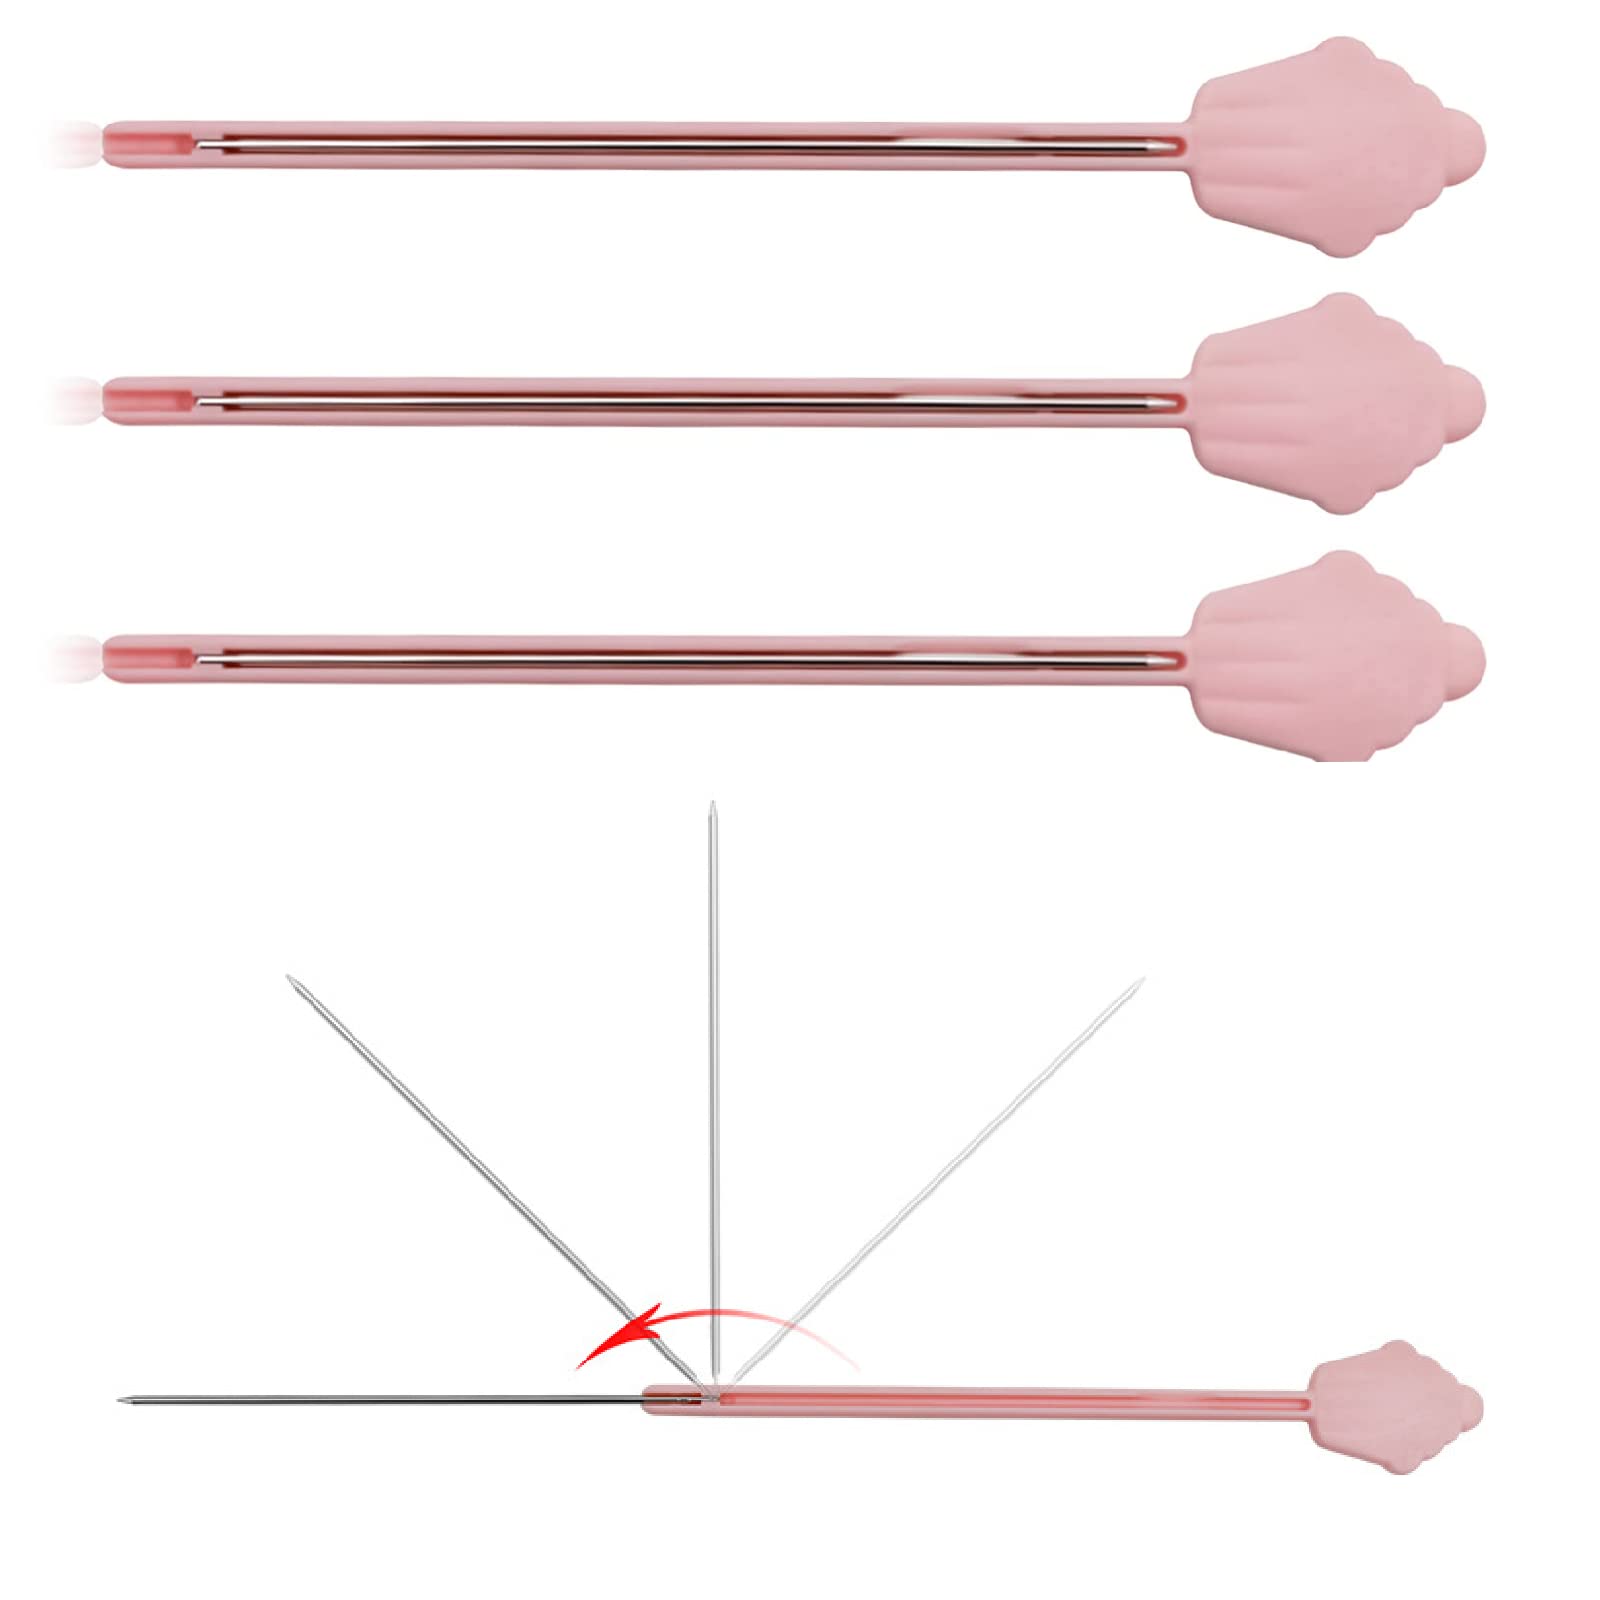 4 Pcs Cake Tester - Foldable Cake Testers for Baking Doneness Stainless Steel Stick Needle for Chiffon Cakes Baking Tools